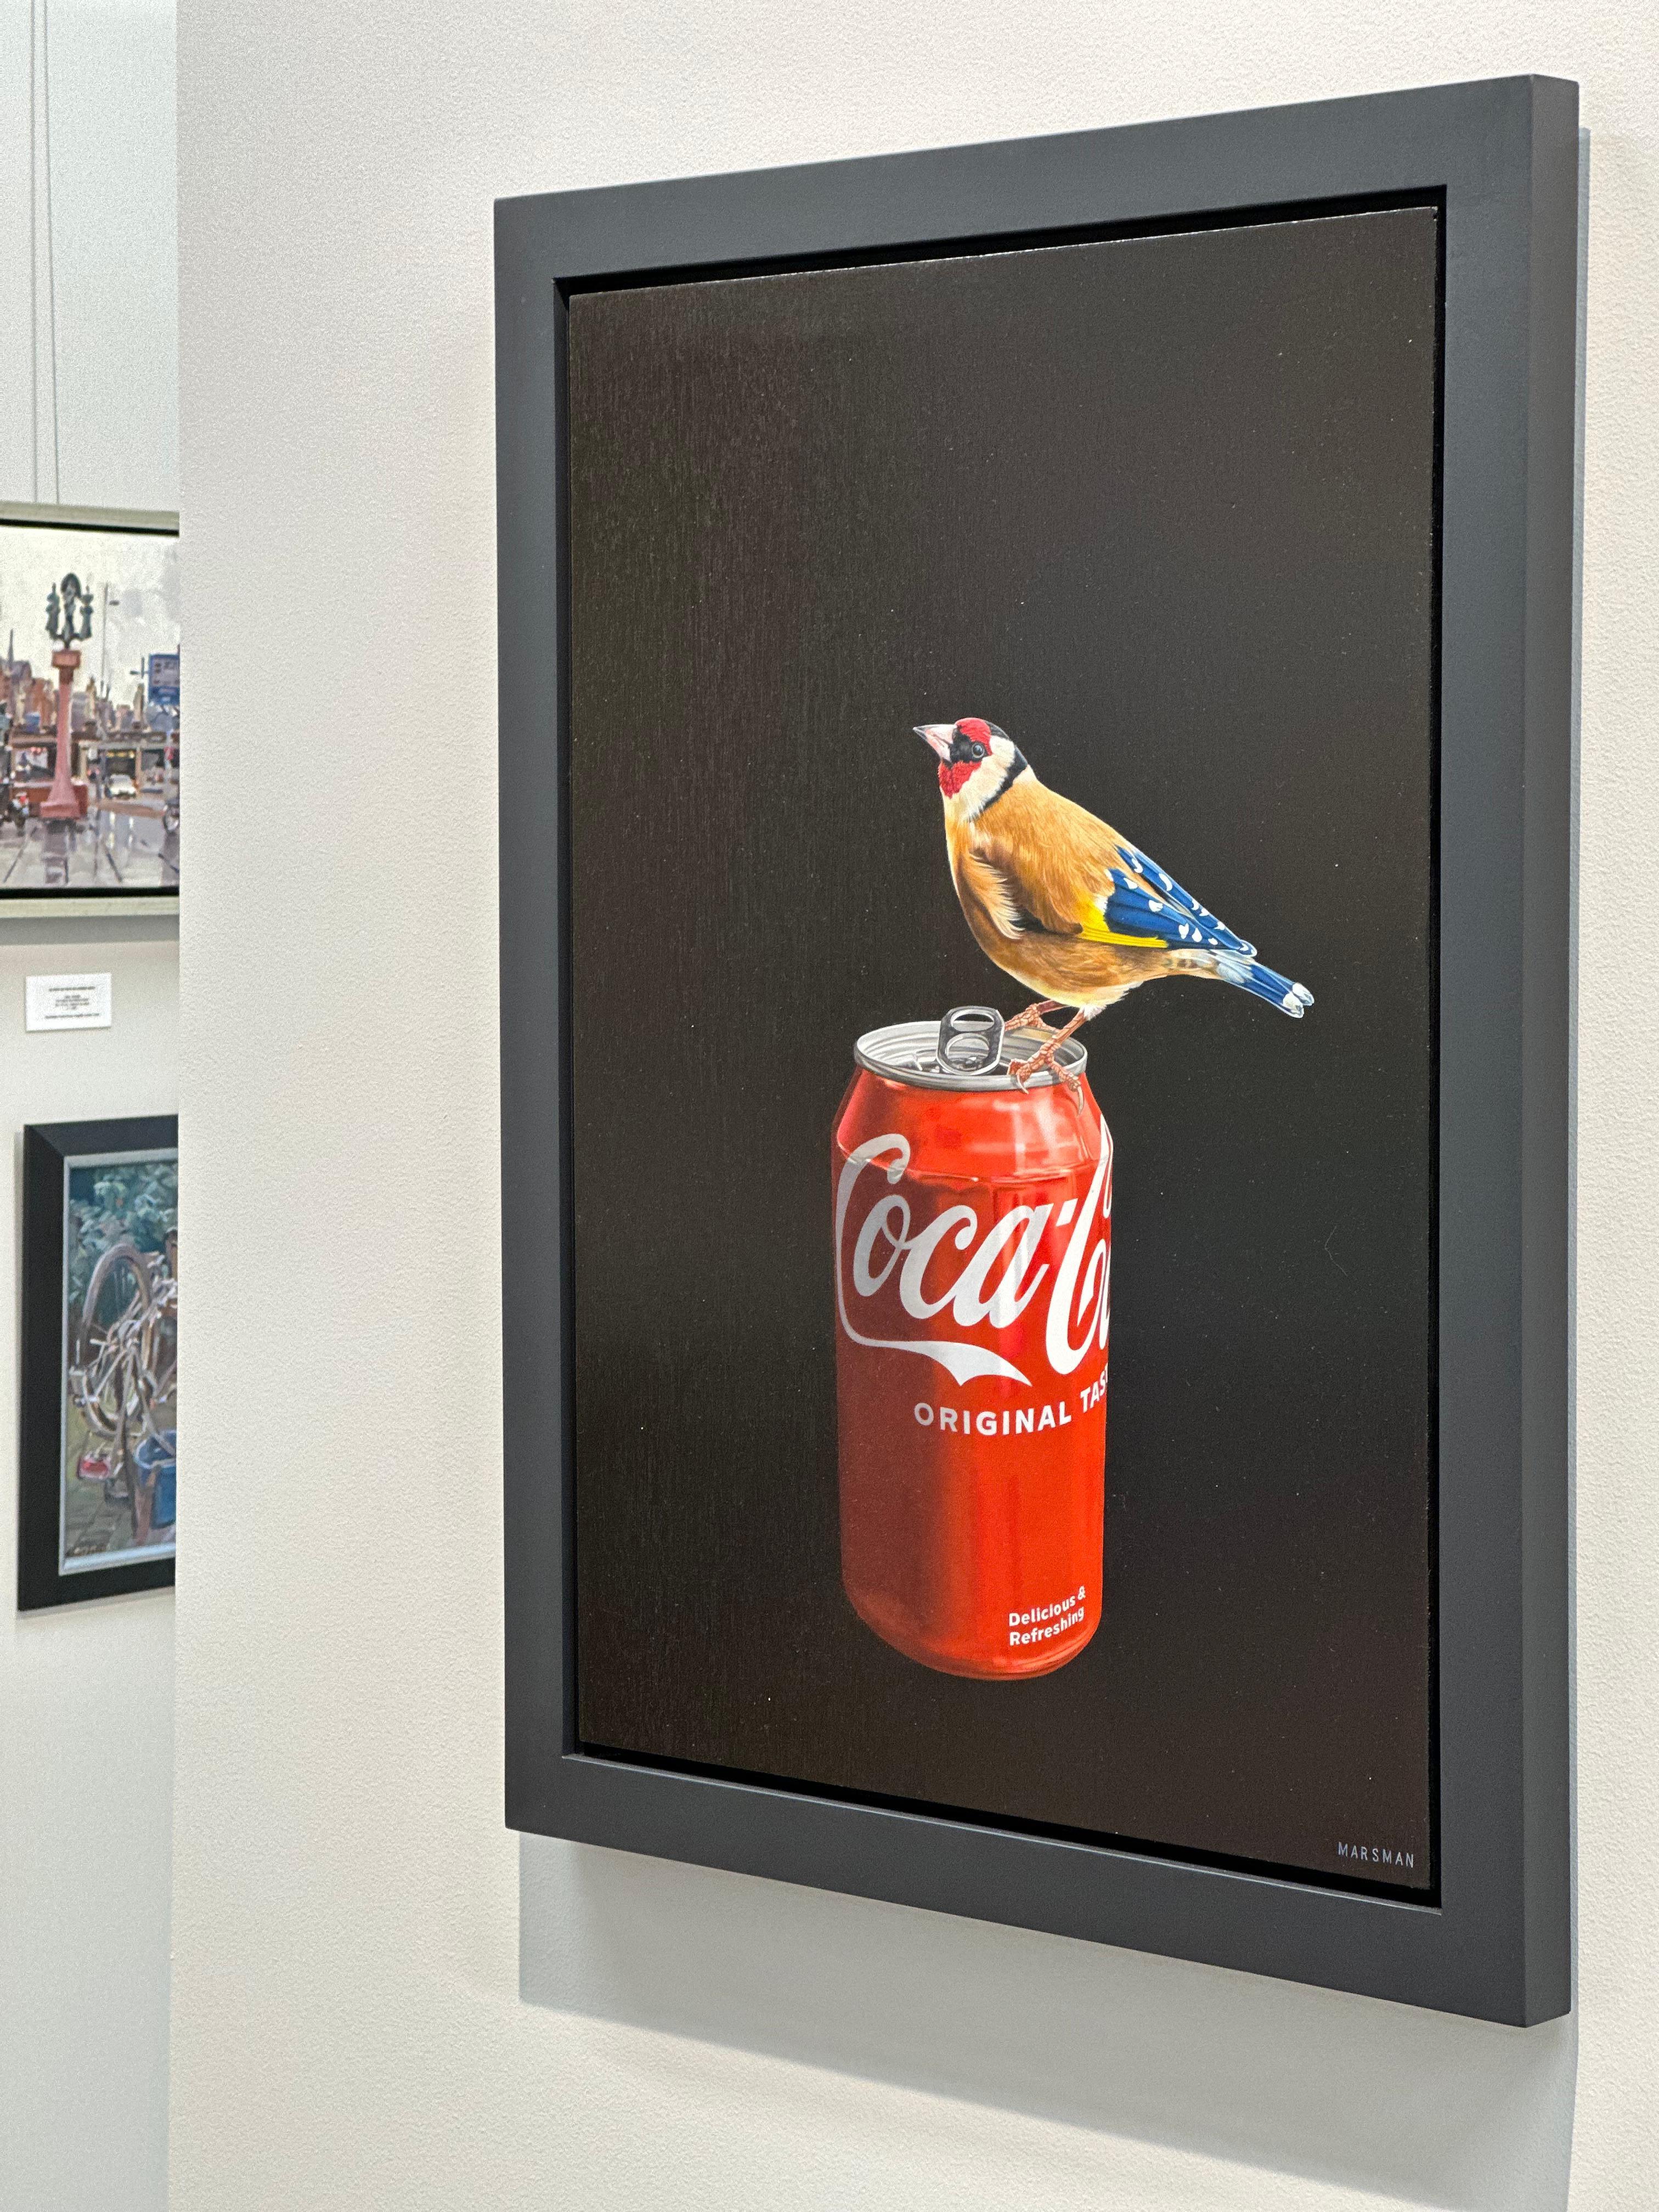 Putter on Coca Cola- 21st Century hyper realistic painting of a bird on coke can - Painting by JP Marsman